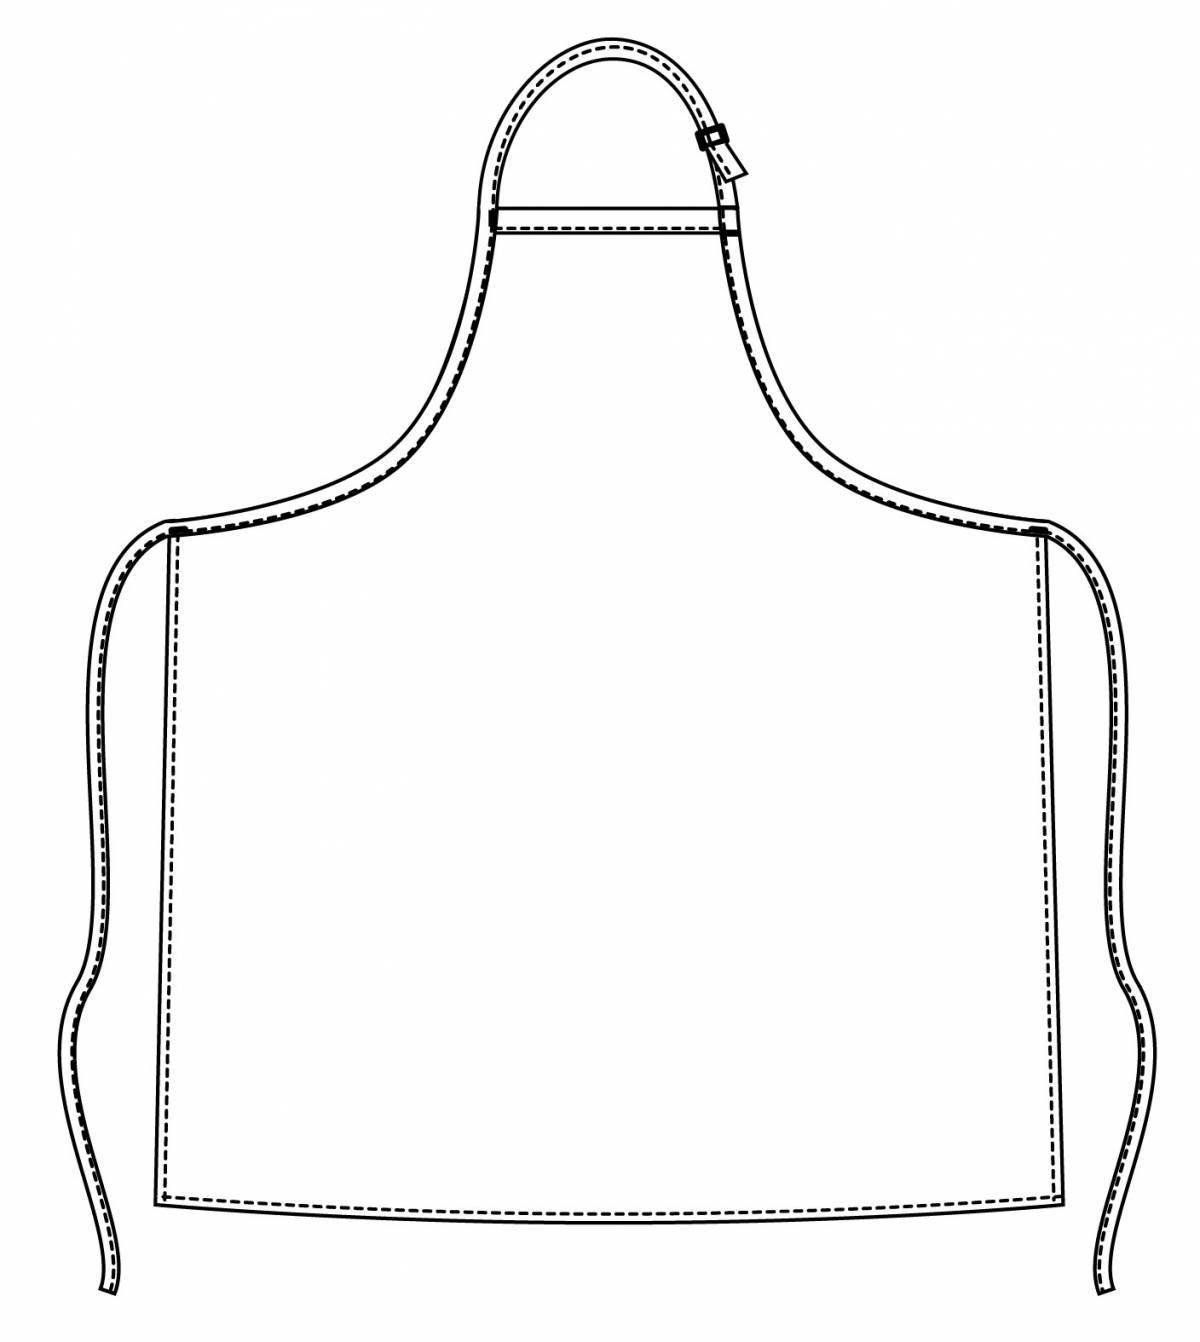 Children's playful apron coloring page